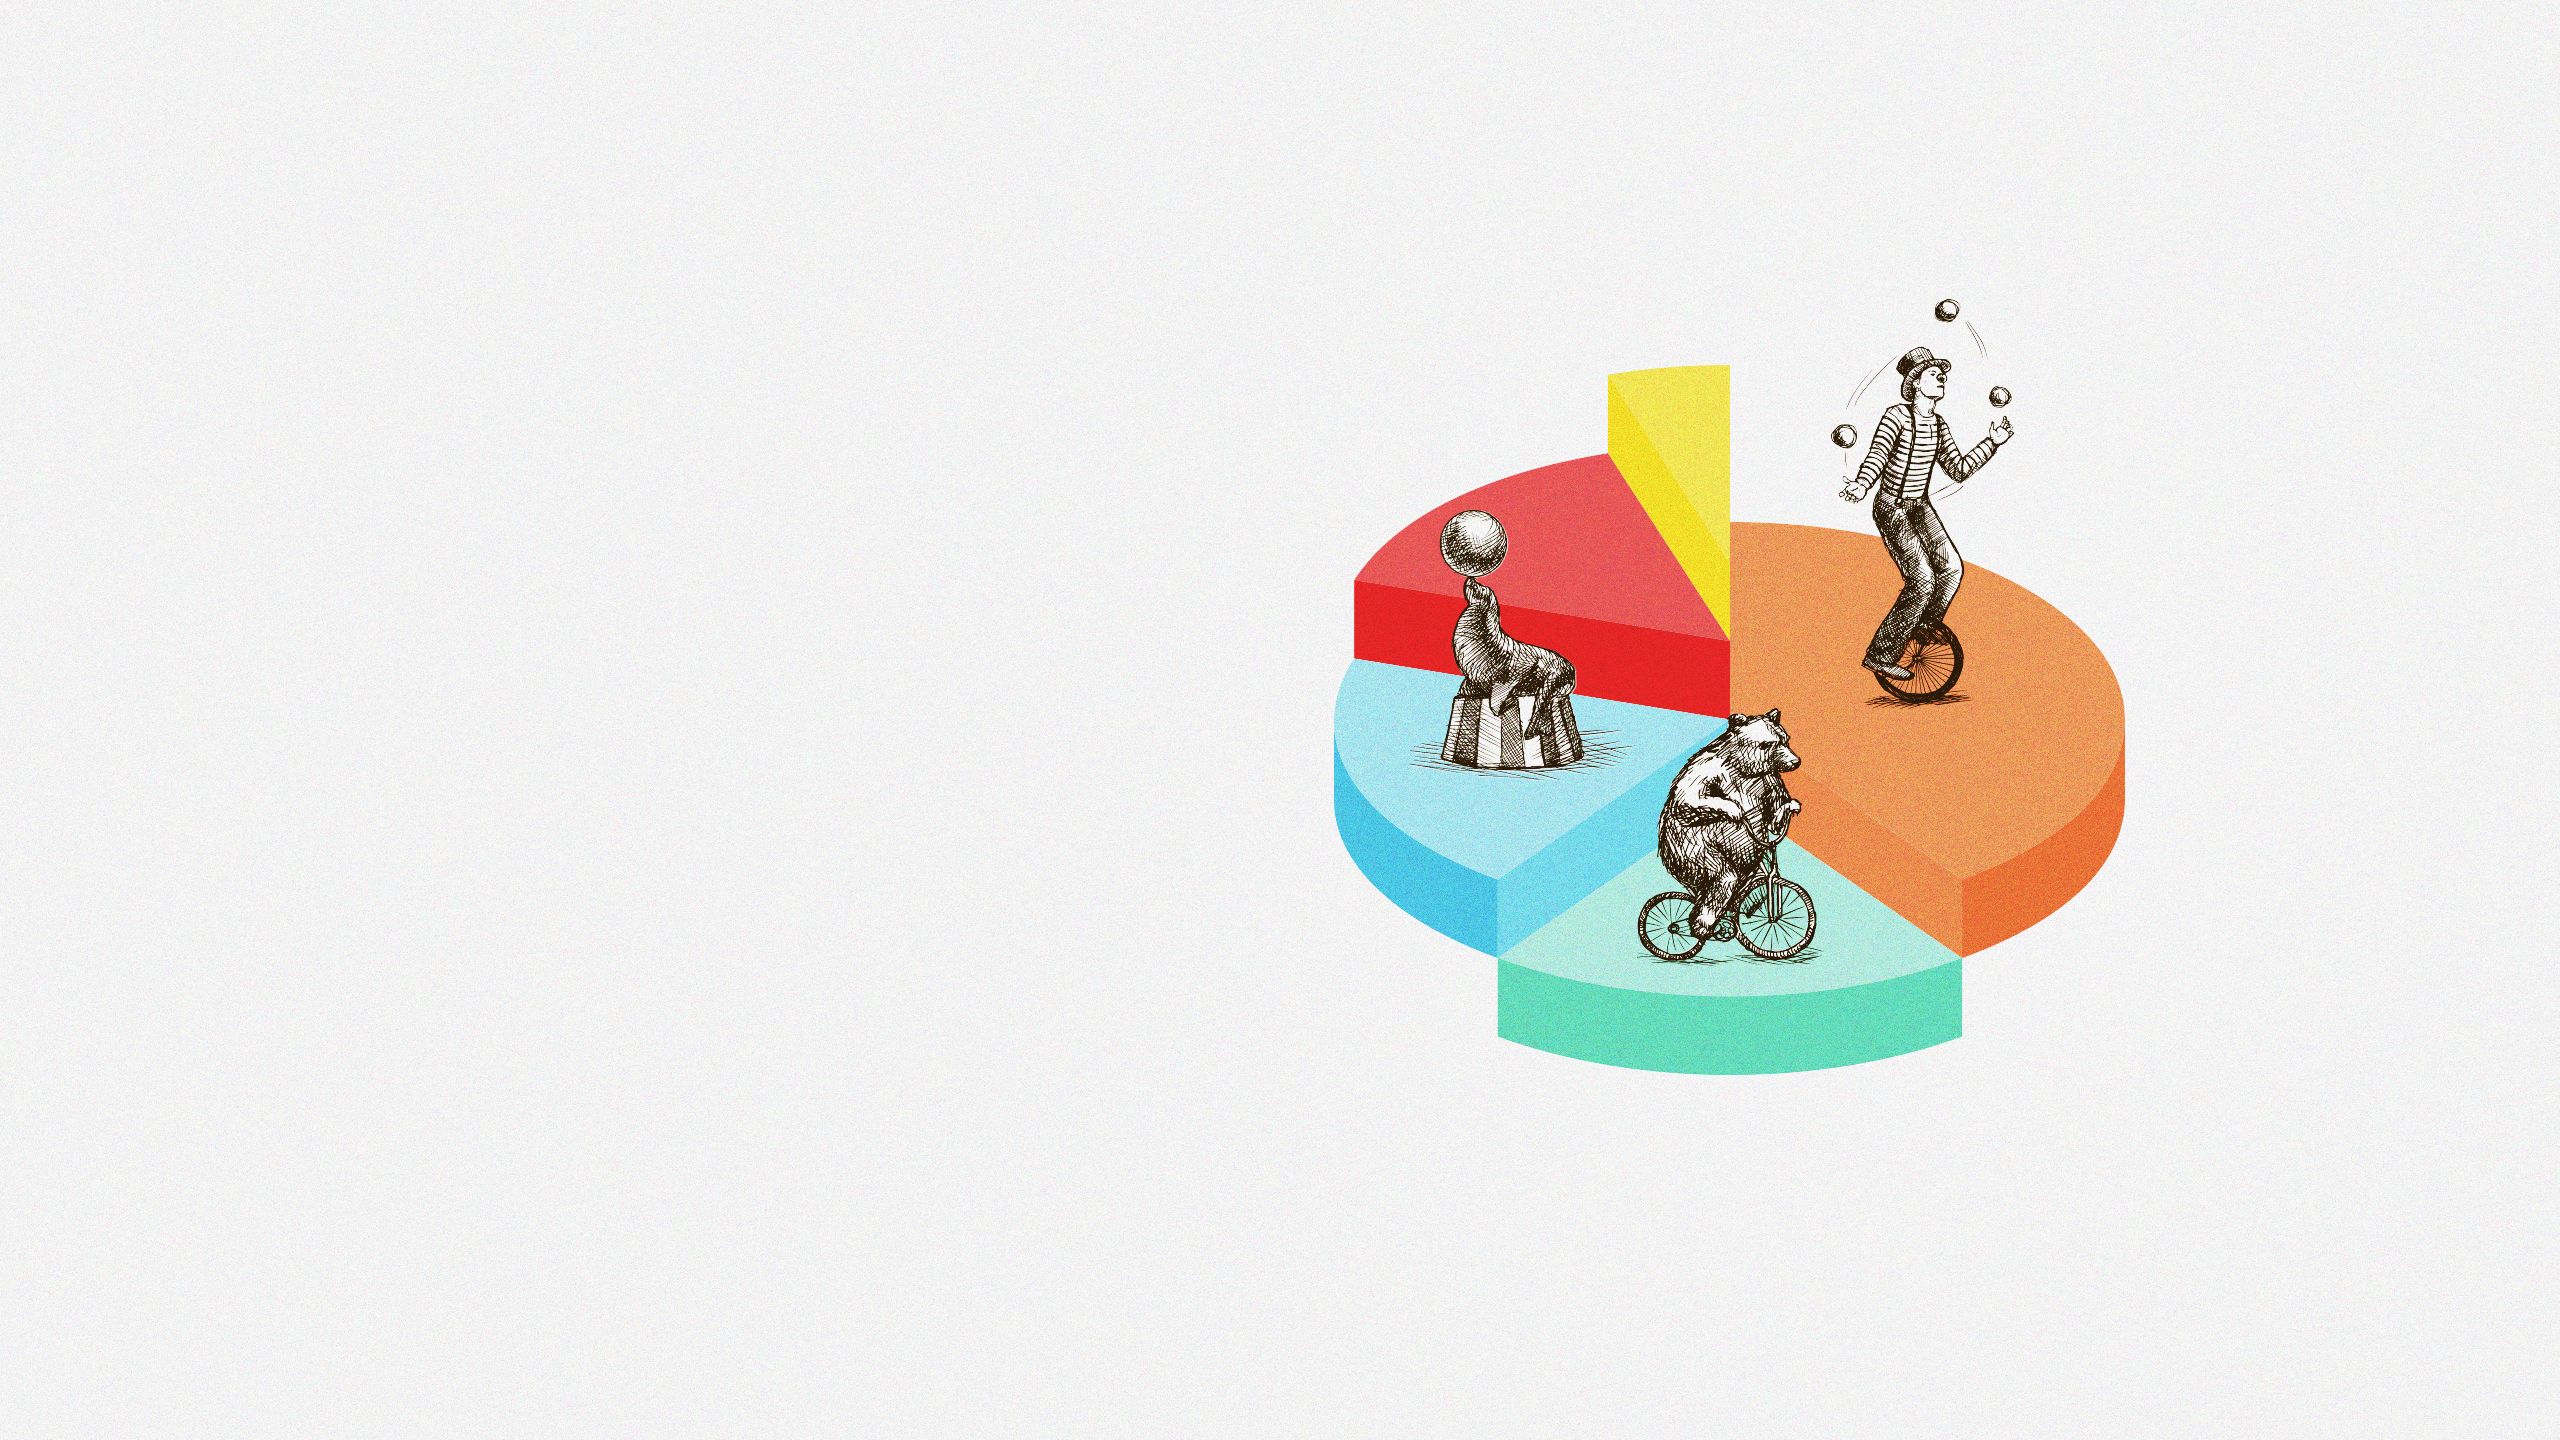 circus performer, seal, and bear perform on a 3D pie chart